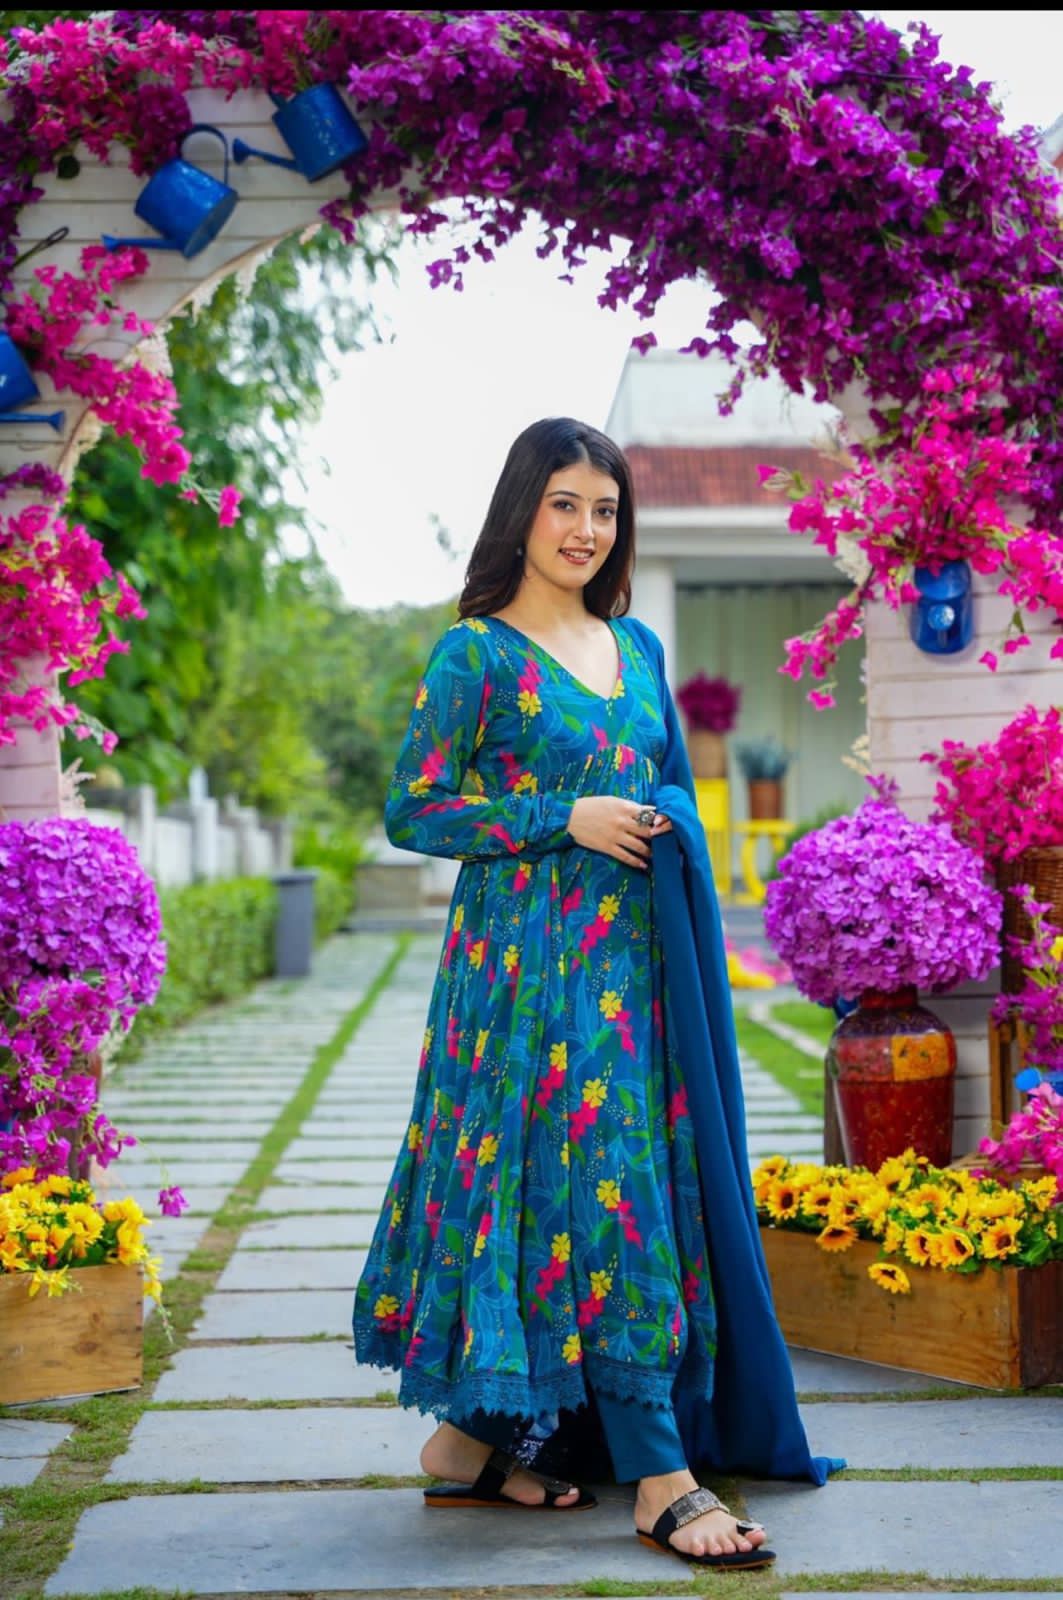 INTRODUCING A GEORGETTE ANARKALI DRESS WITH PRINTED DESIGN